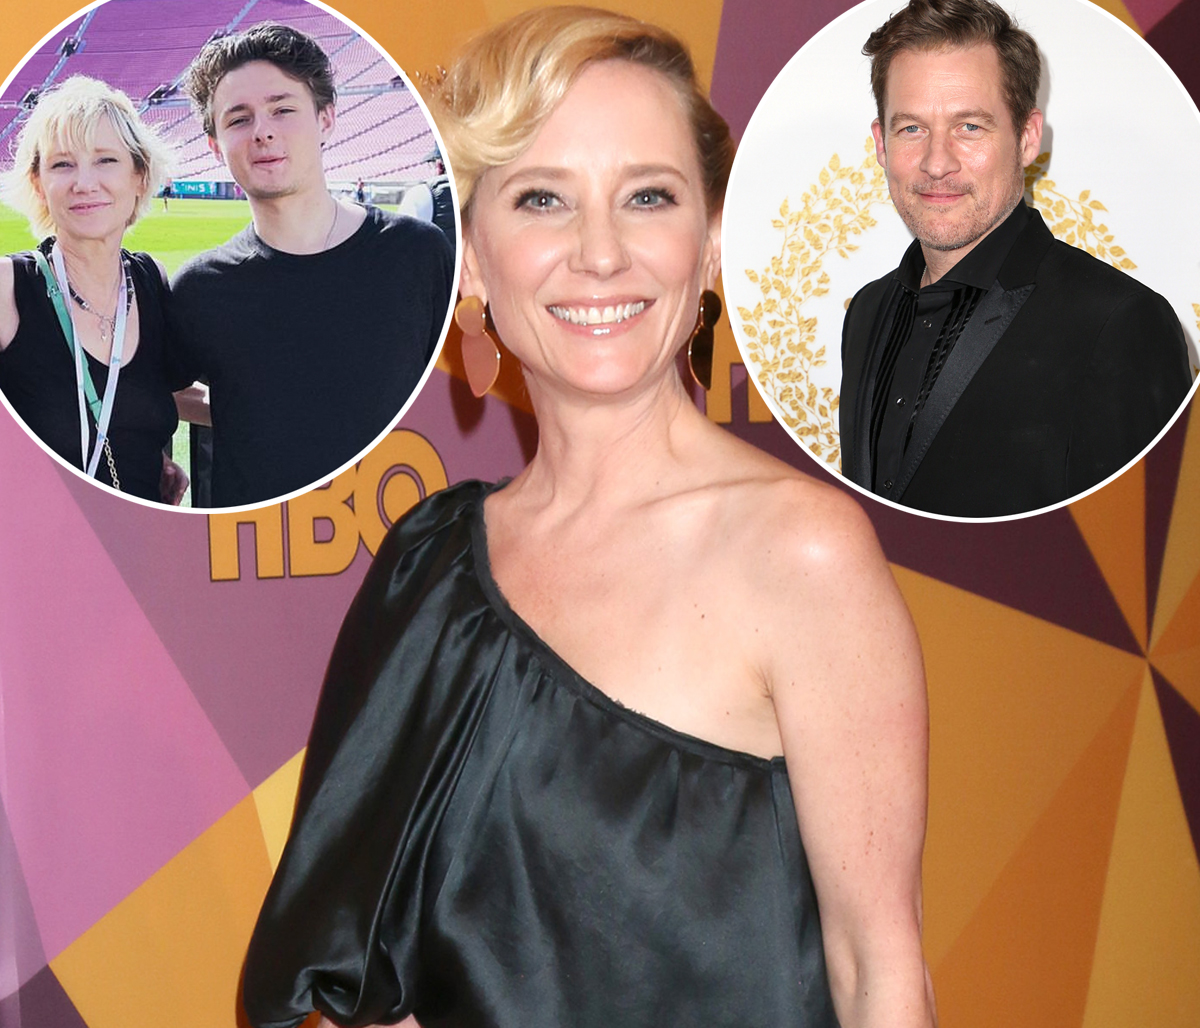 #Feud Getting Worse! Anne Heche’s Son Says Her Ex James Tupper Is Making ‘Unfounded Personal Attacks’ Amid Estate Battle